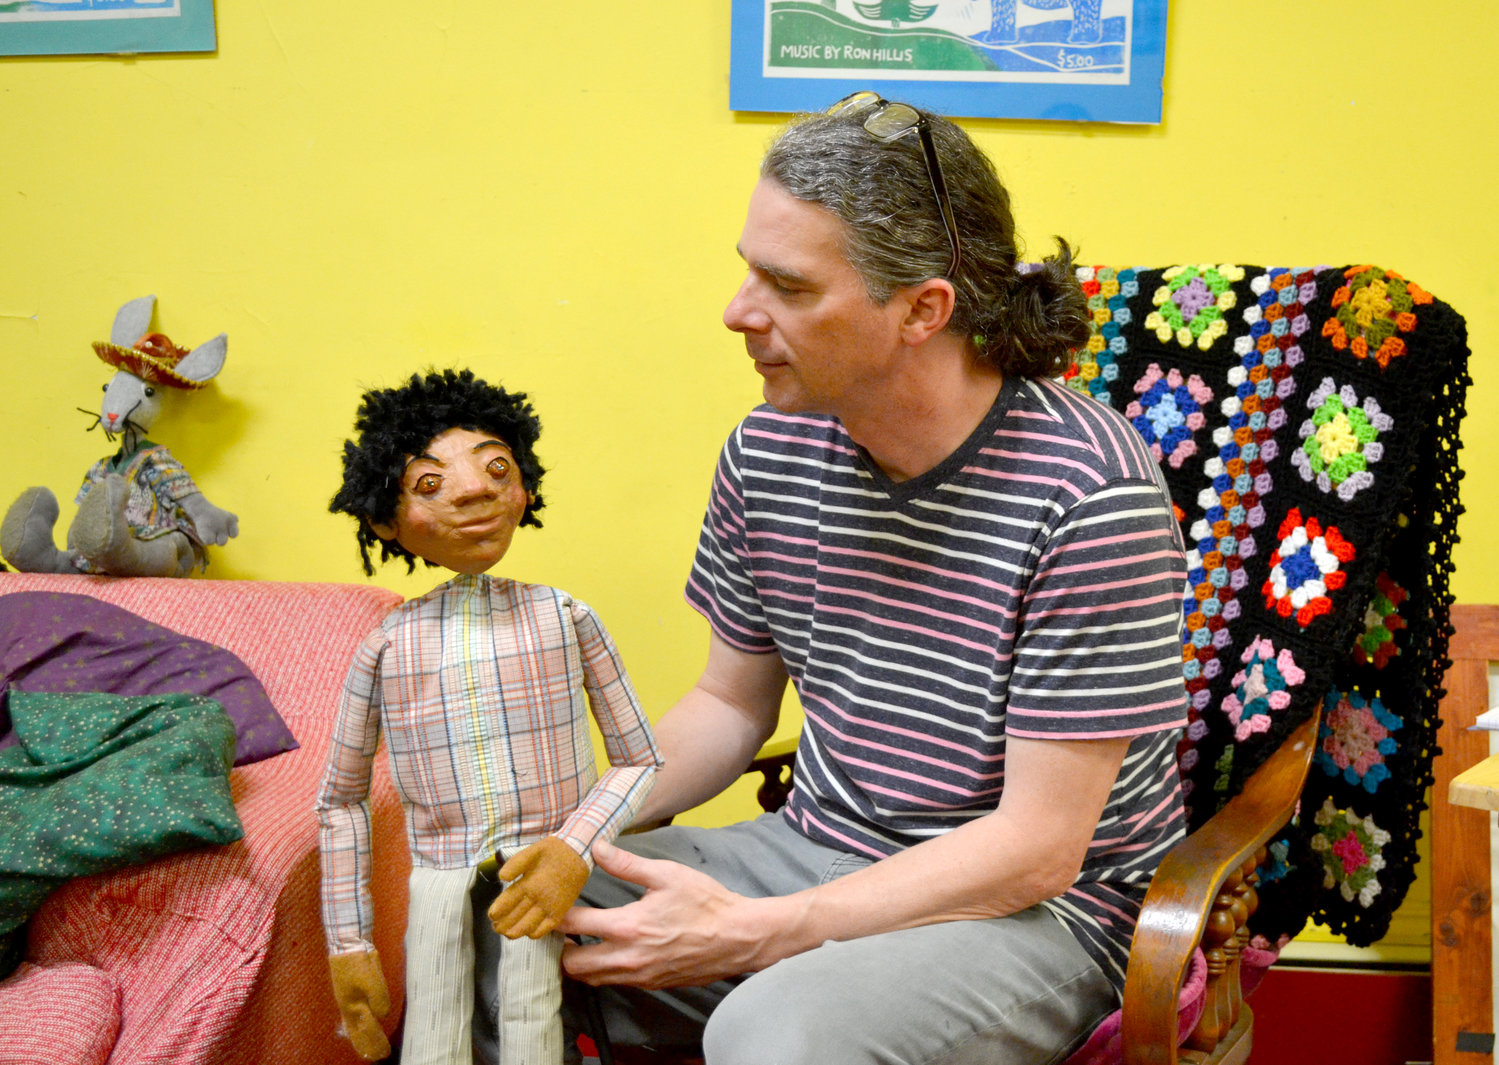 Christopher Eck holds one of the rod puppets from the performance, “Remembering Buxton.”